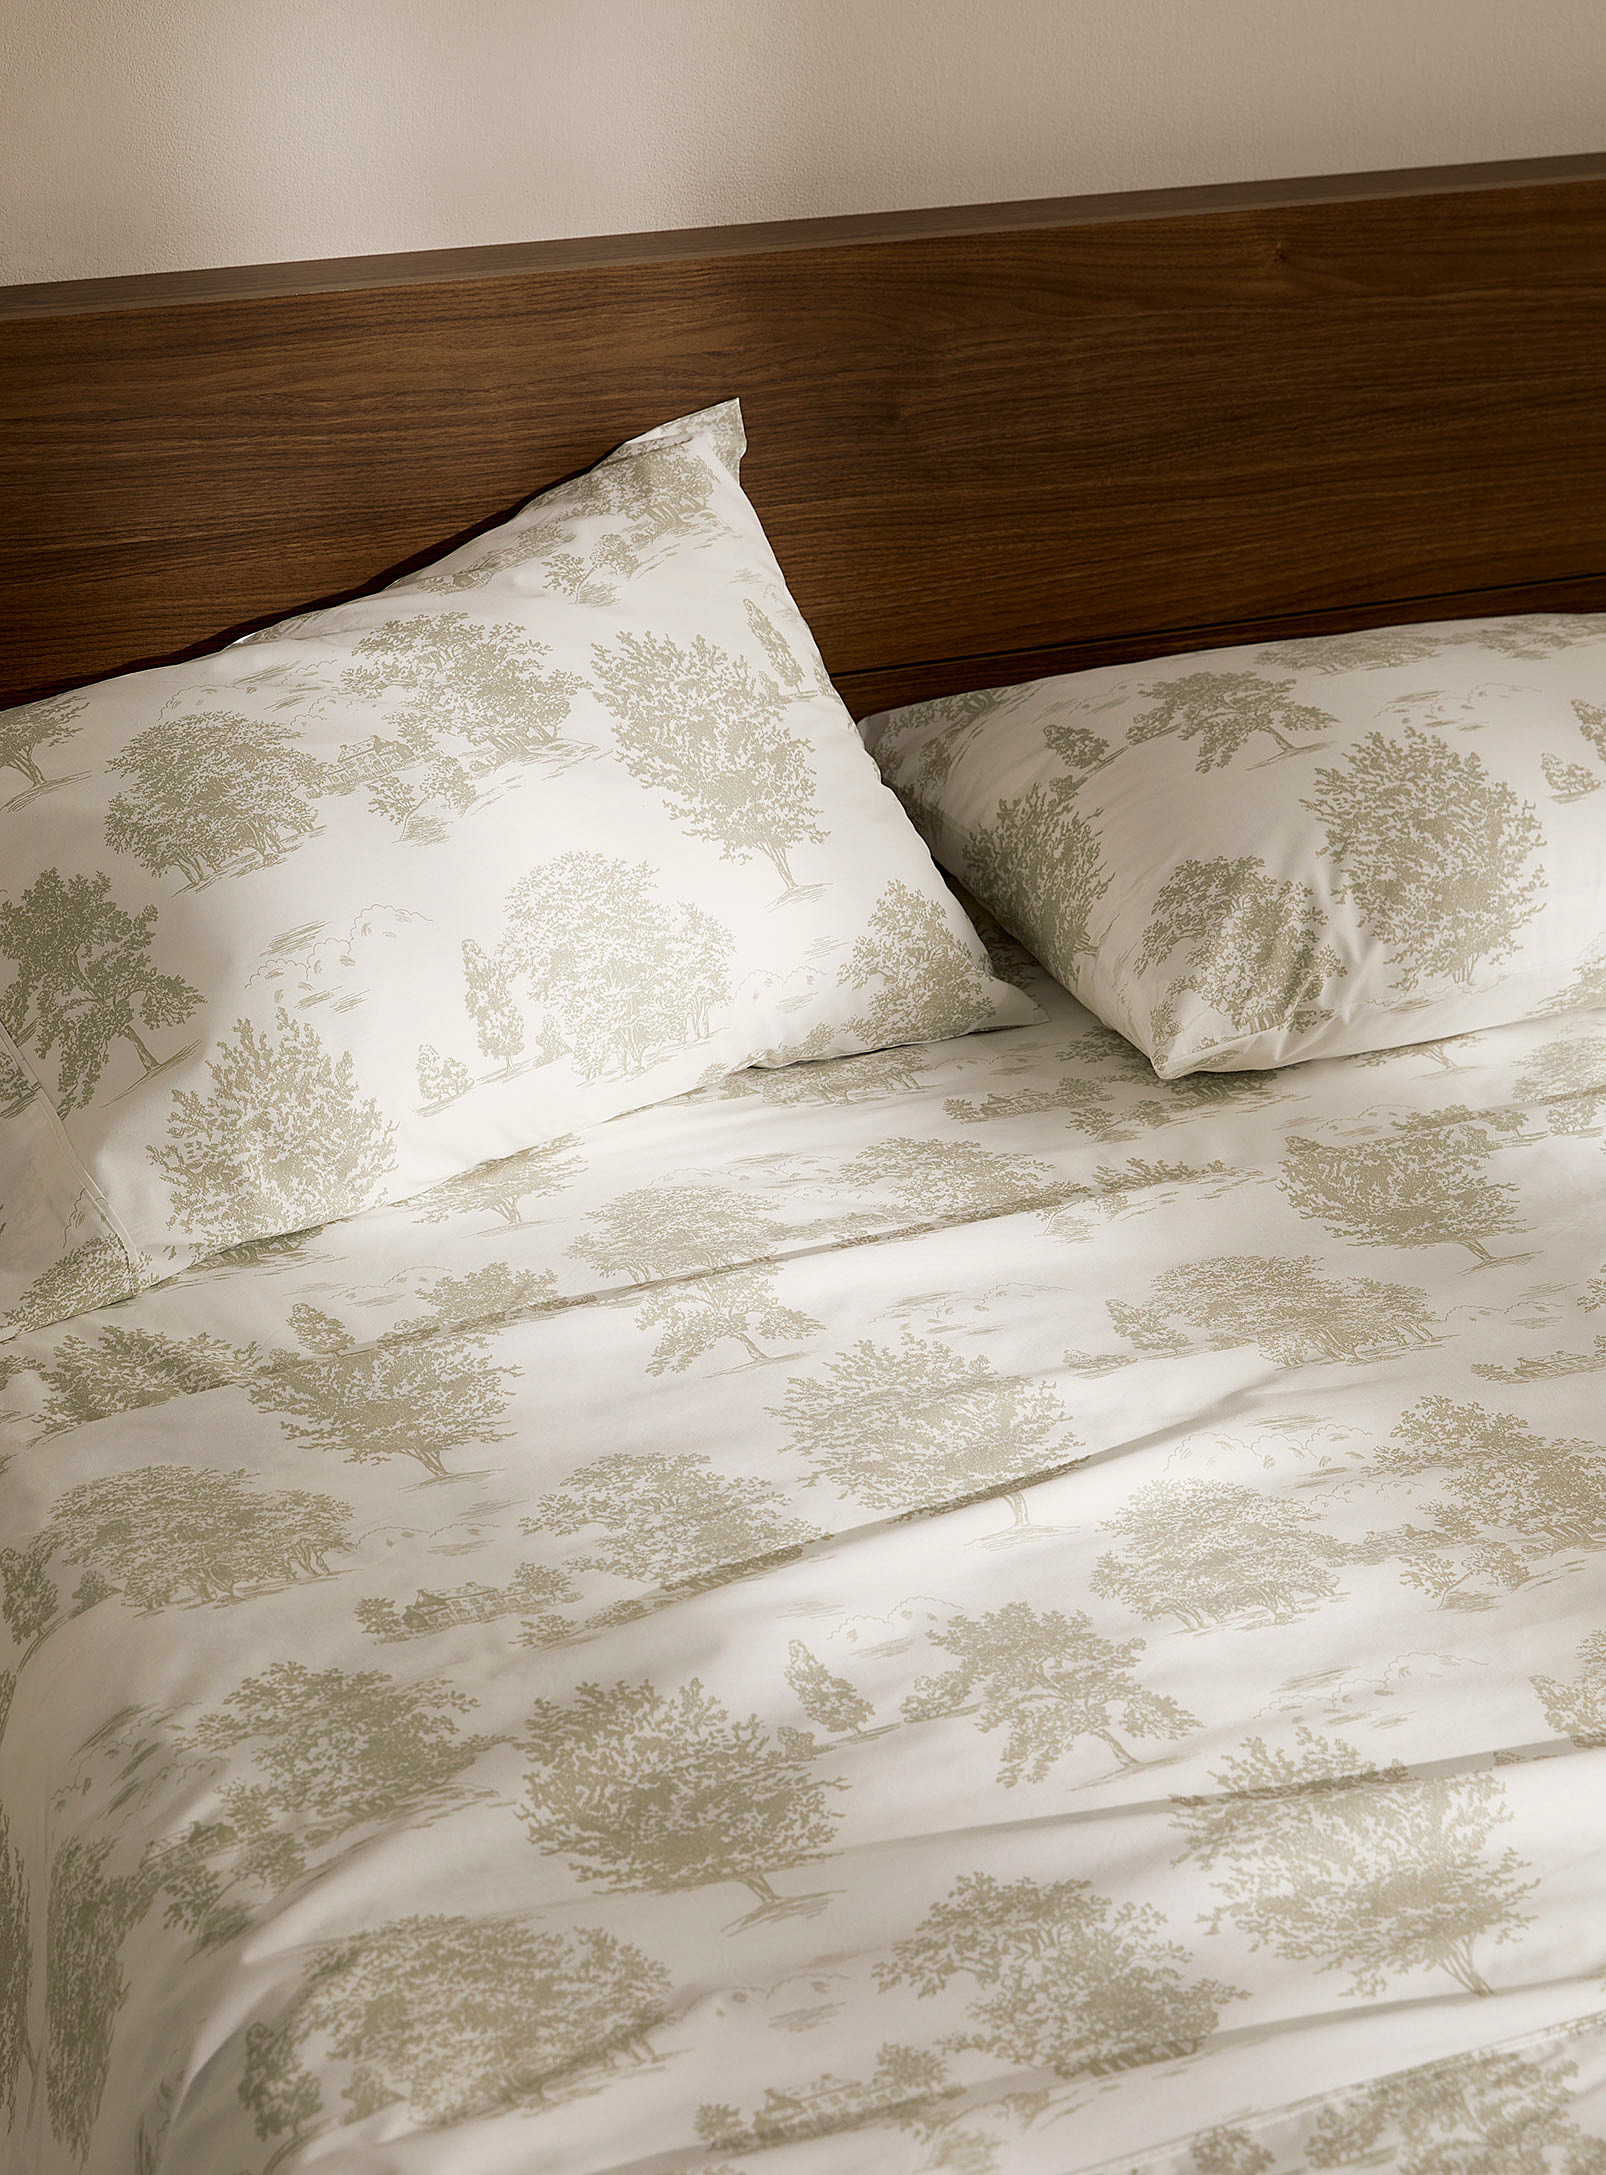 Simons Maison Toile De Jouy Percale Plus Sheet 200-thread-count Fits Mattresses Up To 15 In In Patterned Ecru